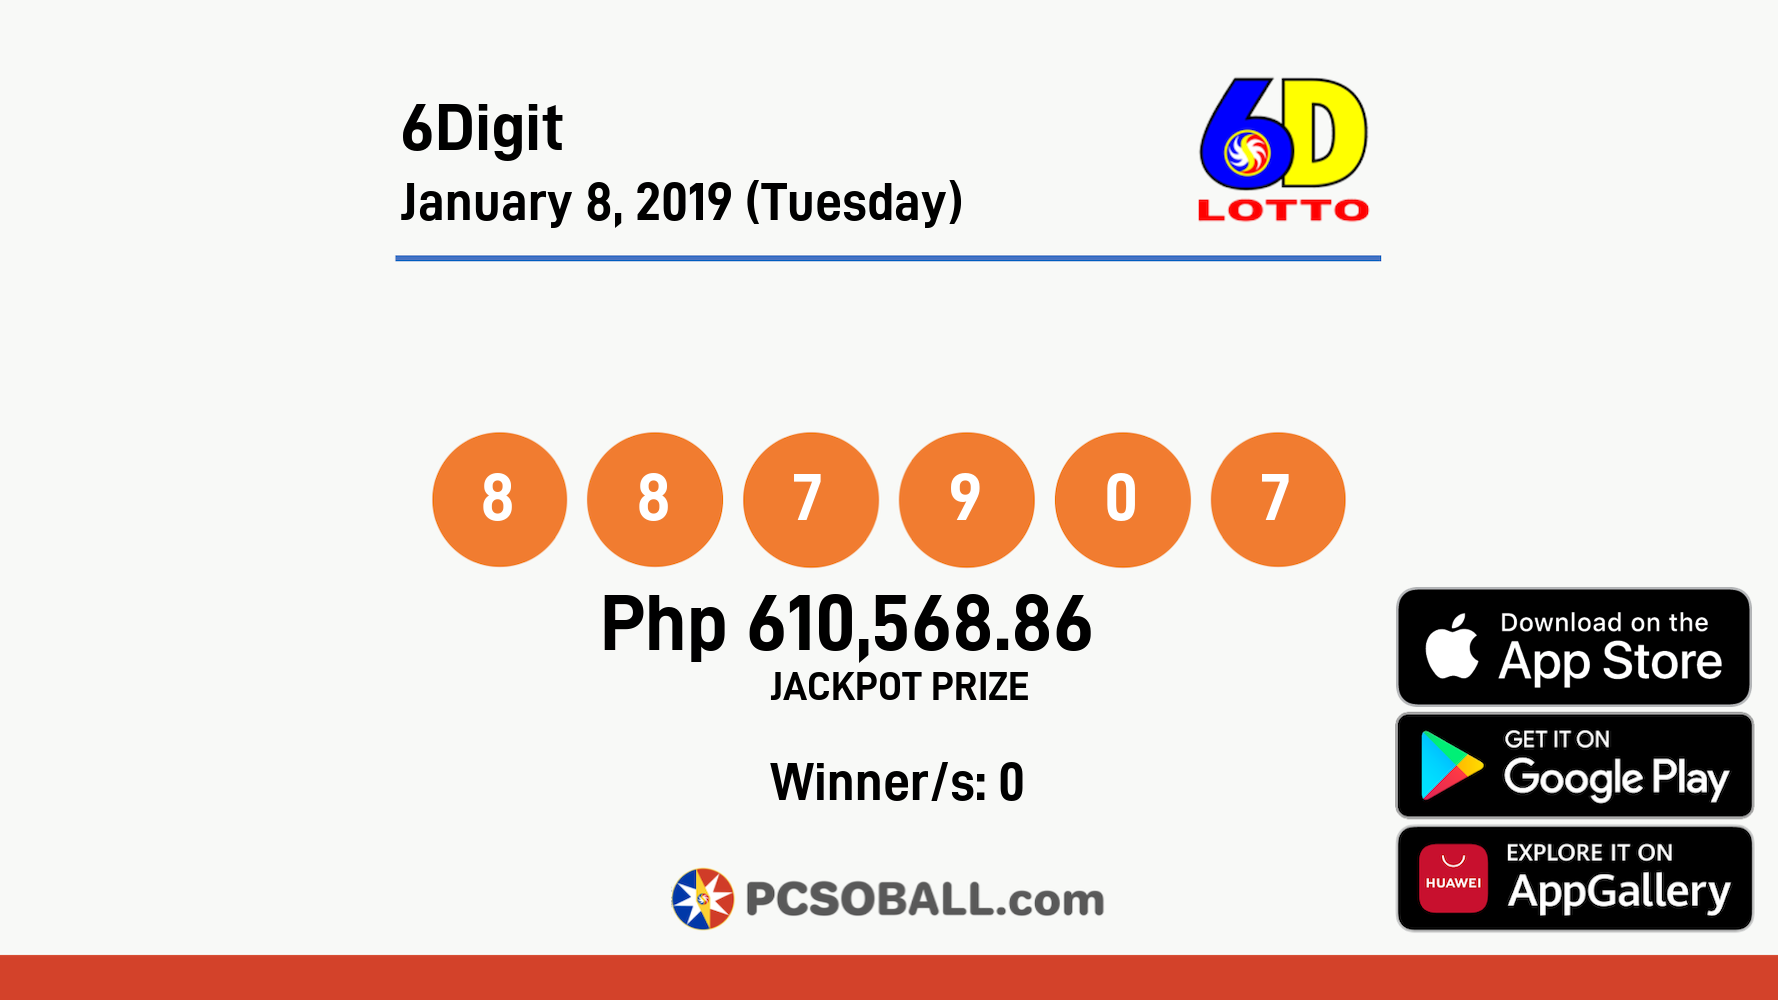 6Digit January 8, 2019 (Tuesday) Result